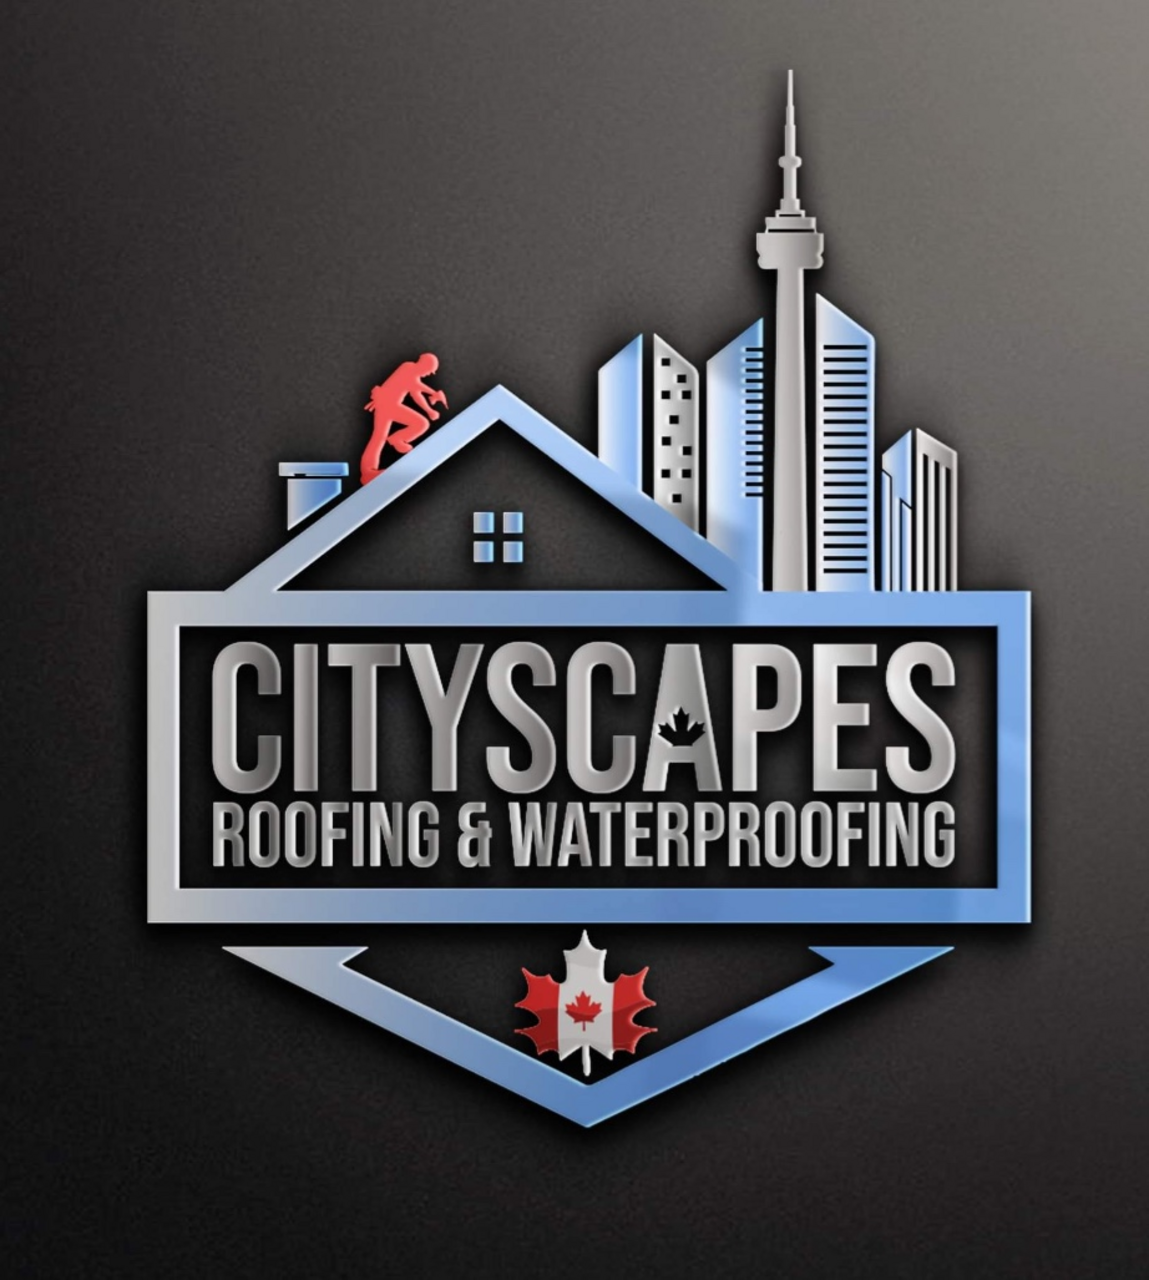 Cityscapes roofing & waterproofing 's logo